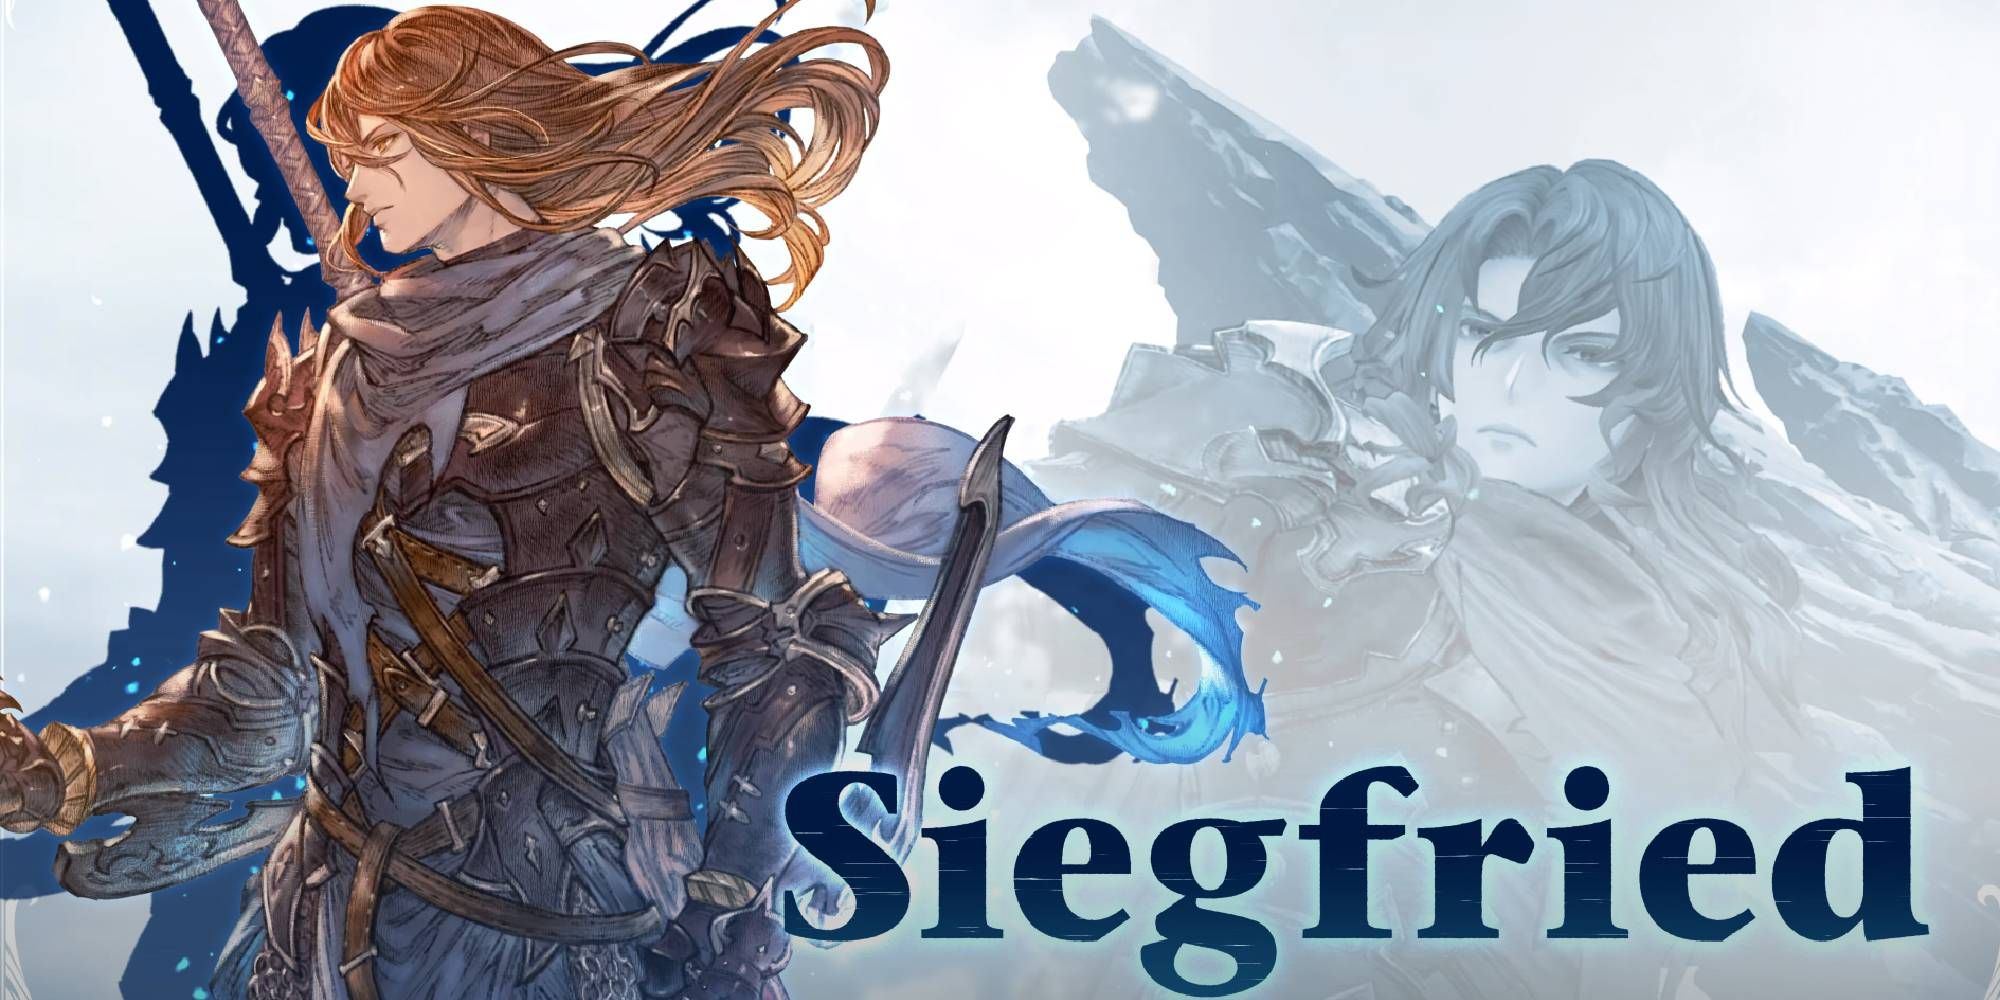 Granblue Fantasy Relink Playable Characters List: A quick guide to